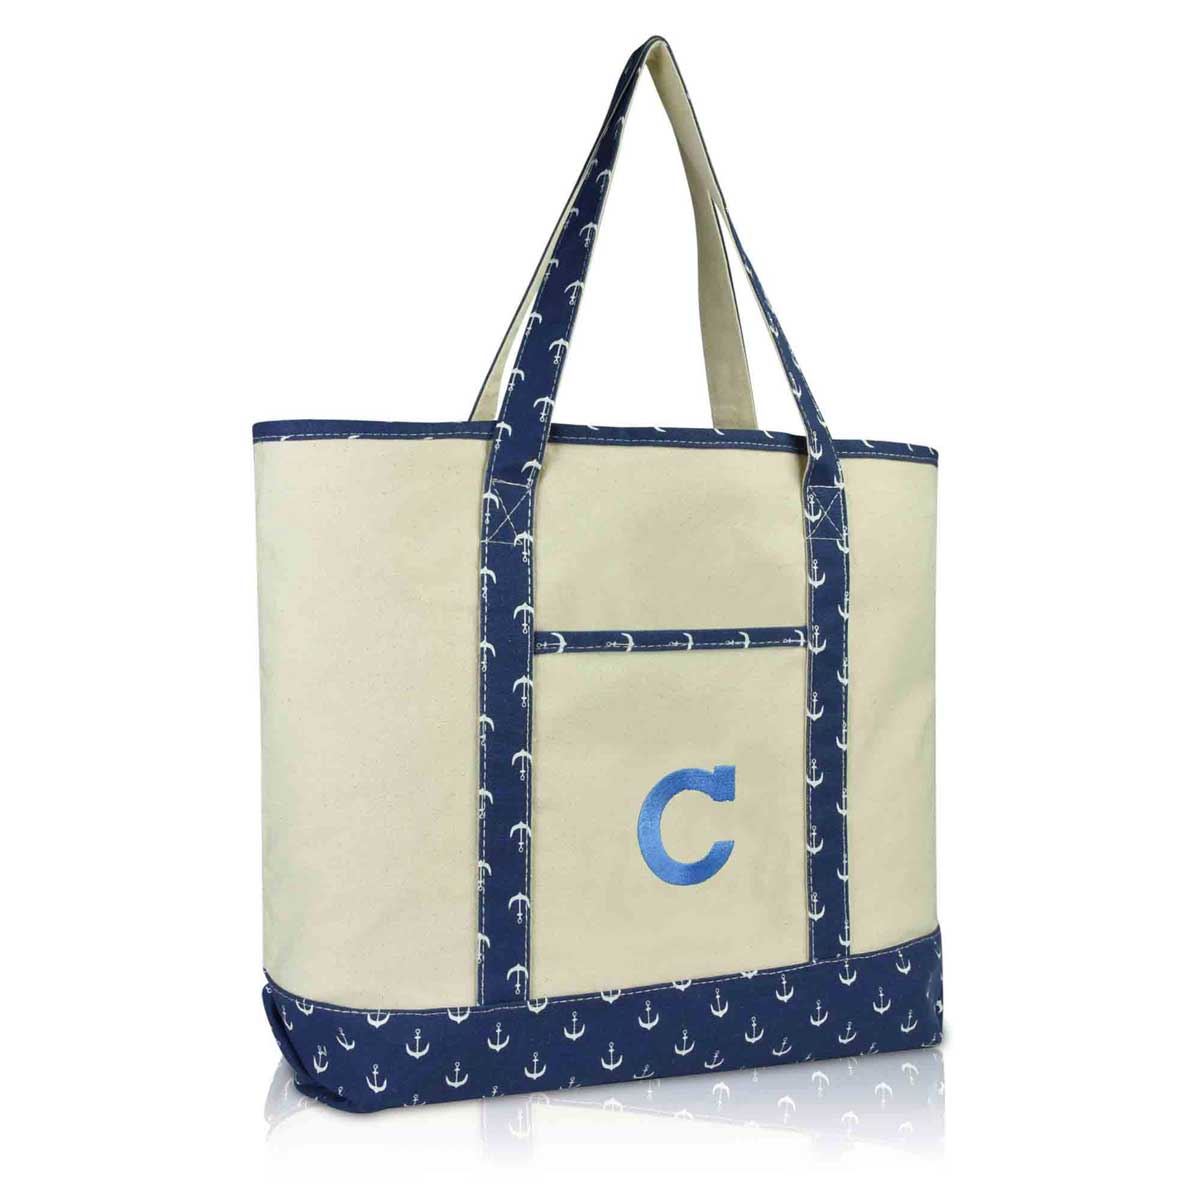 Dalix Initial Tote Bag Personalized Monogram Zippered Top Letter - C